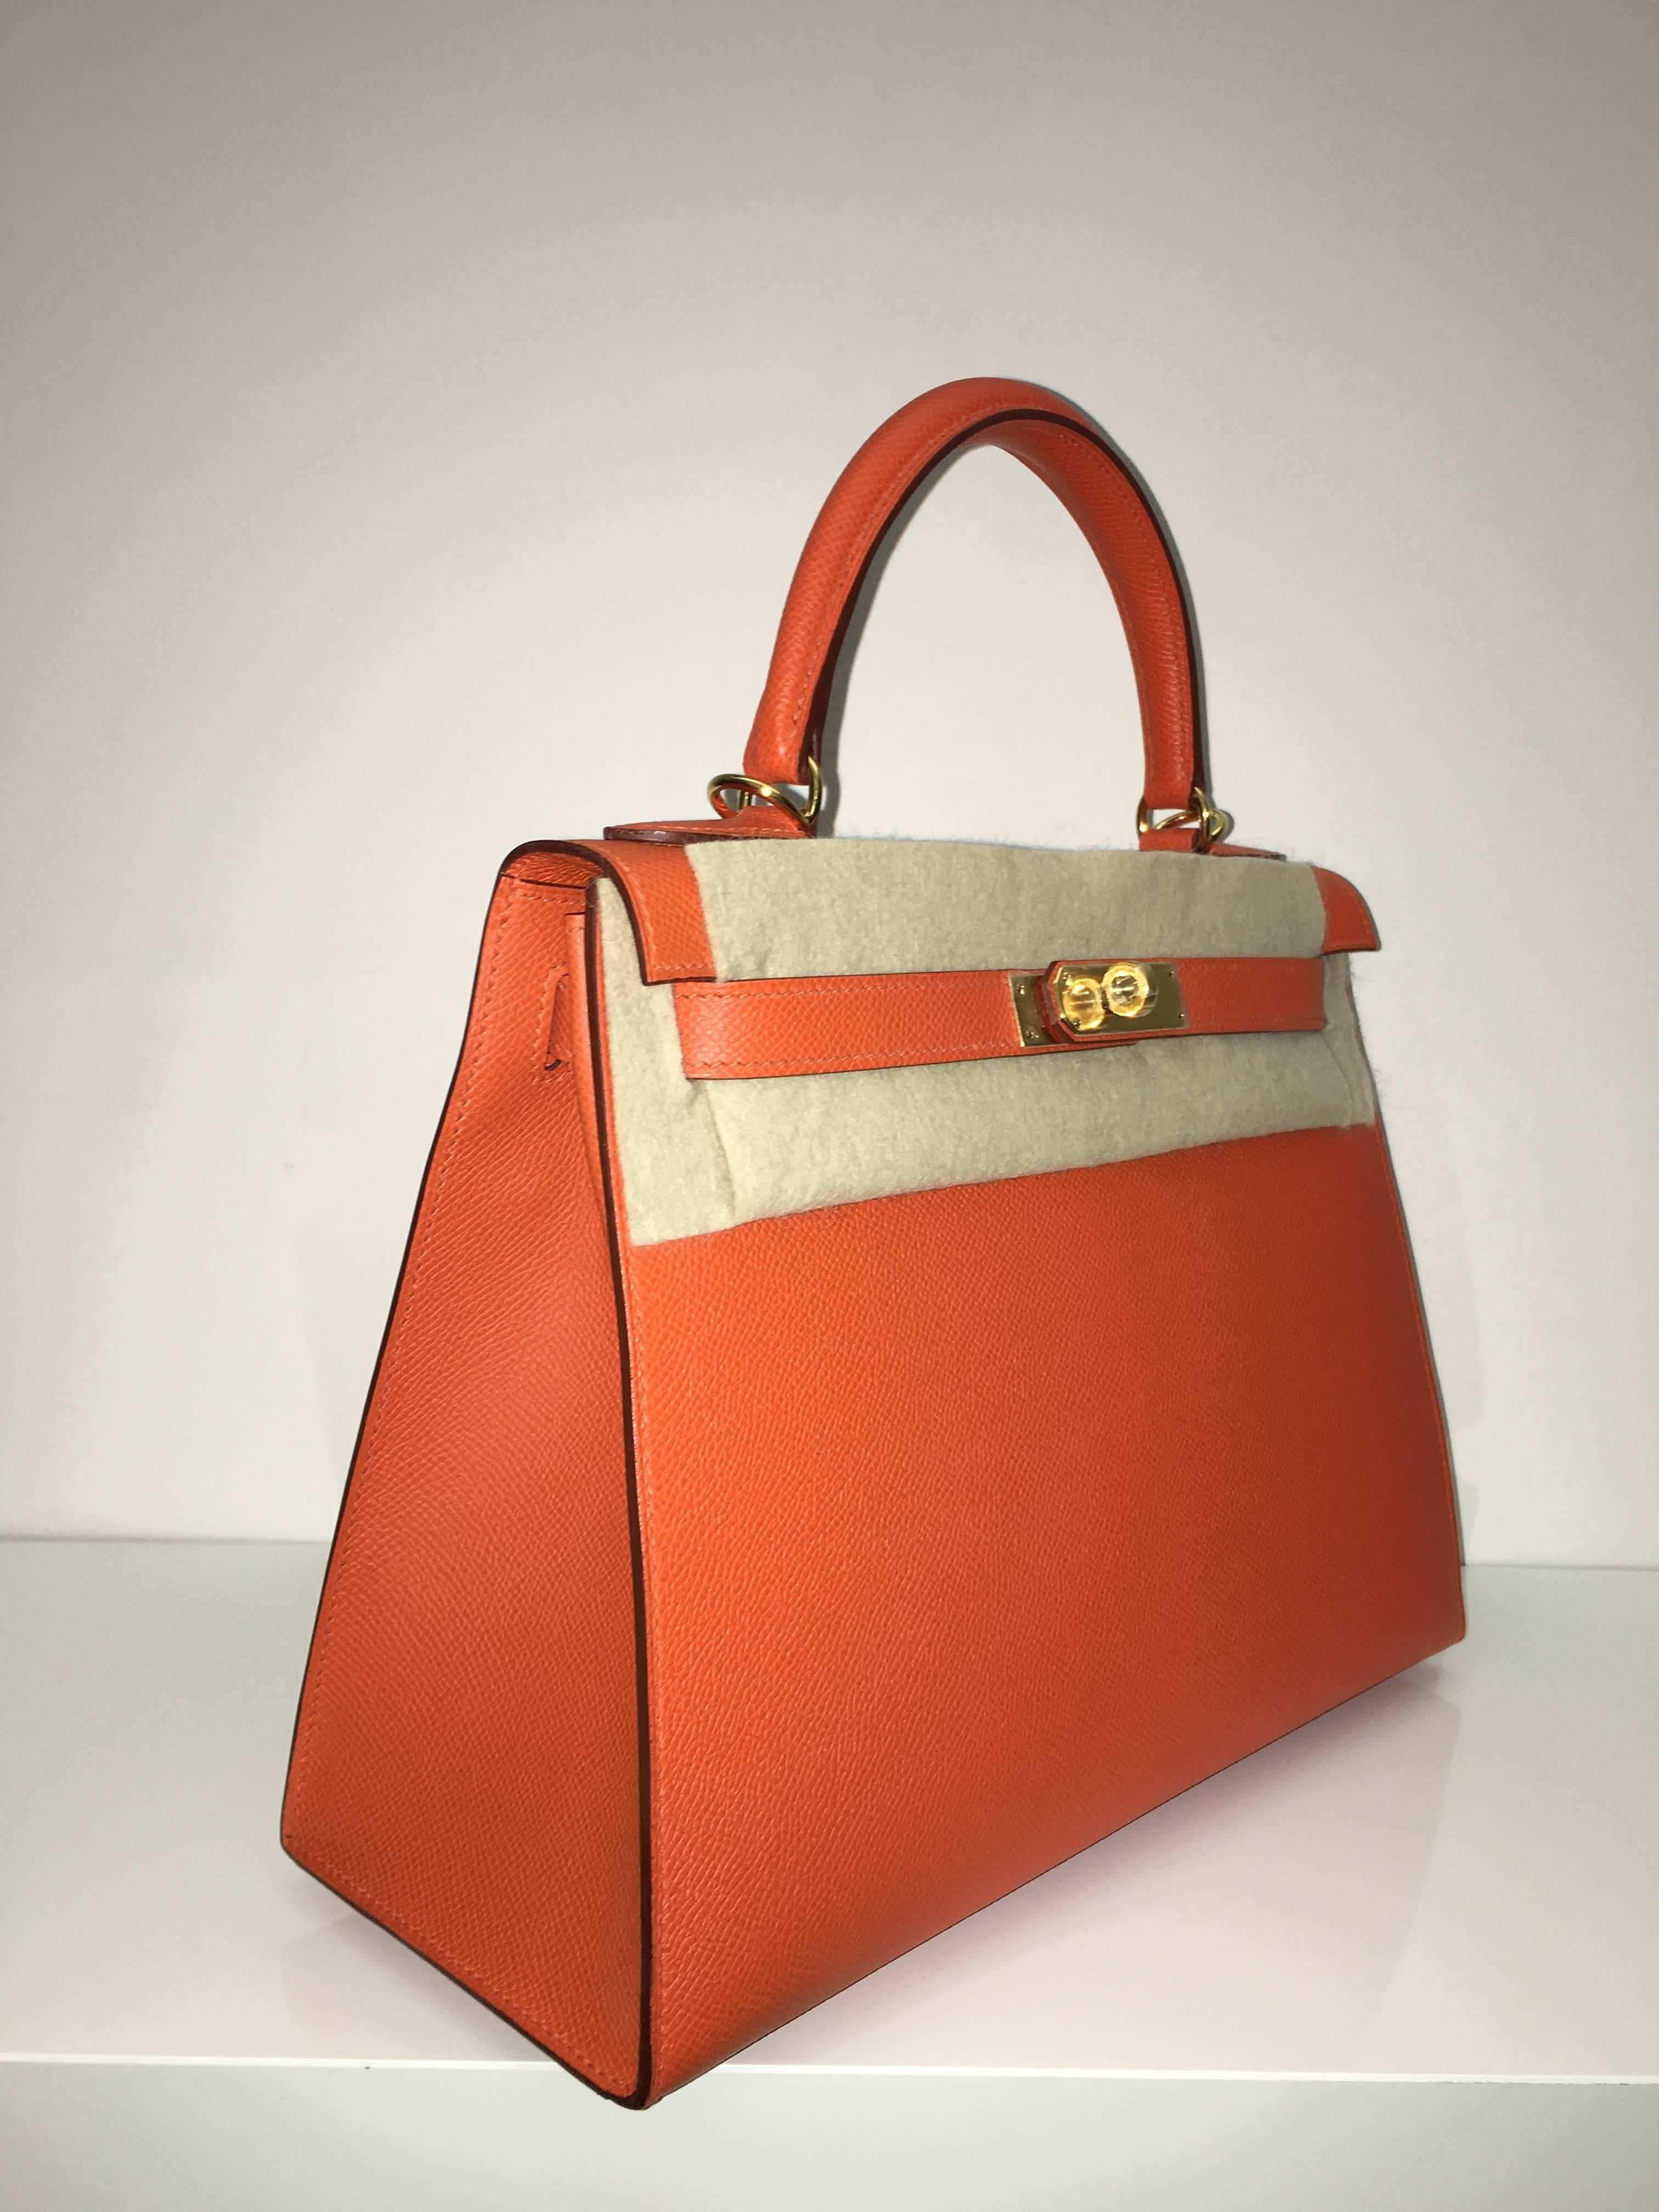 Hermes 
Kelly Size 28
Epsom Leather 
Colour Fue (Orange)
Gold Hardware 
store fresh, comes with receipt and full set (dust bag, box...) 
Hydeparkfashion specializes in sourcing and delivering authentic luxury handbags, mainly Hermes, to client